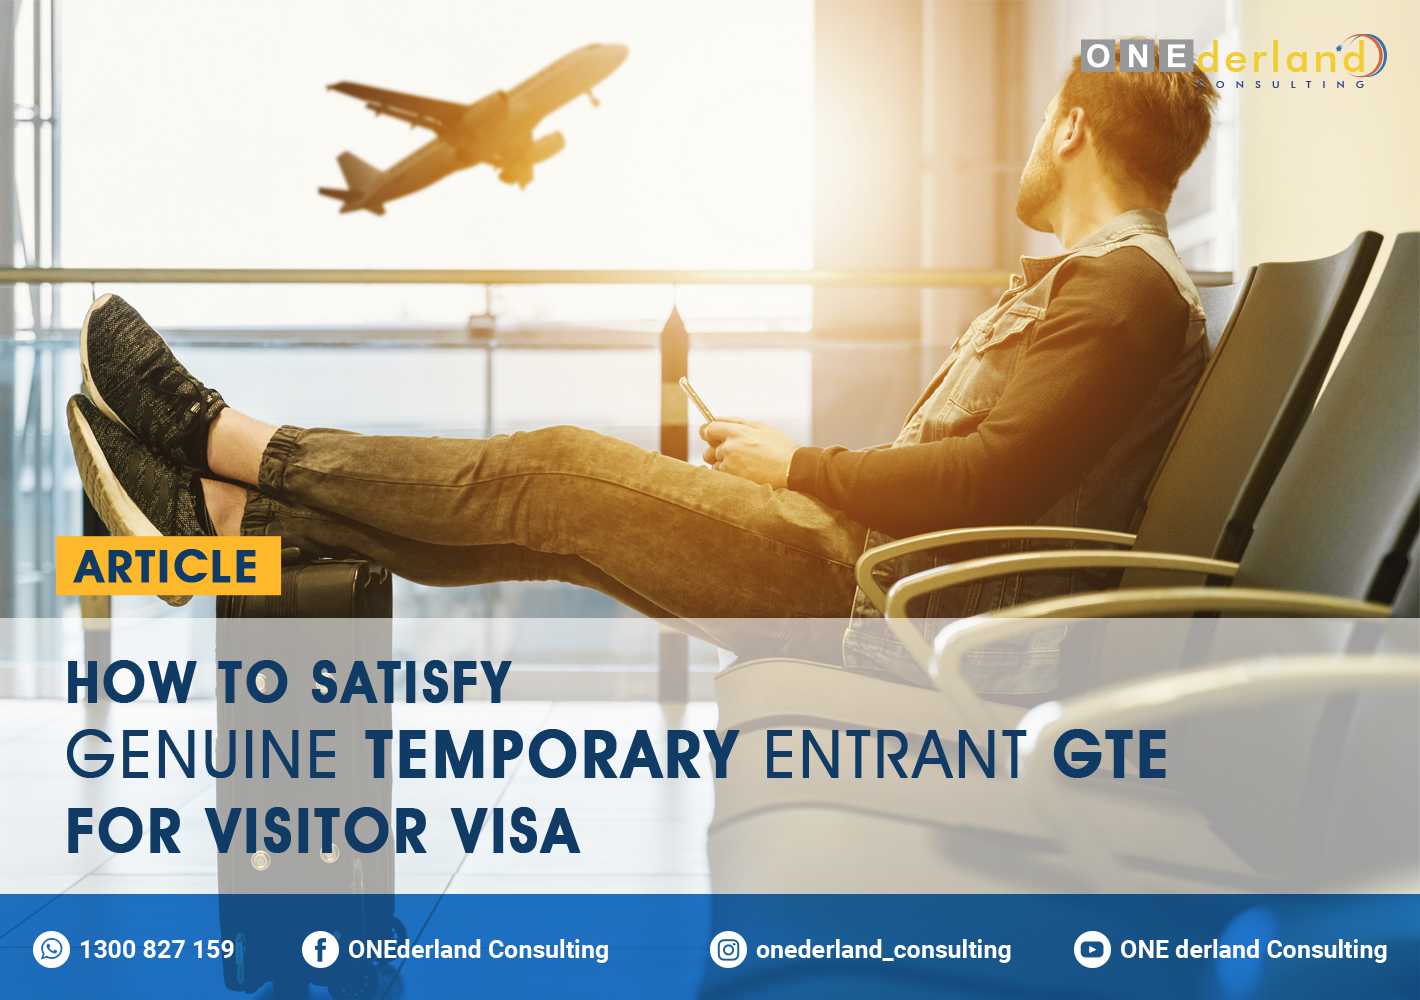 How to Satisfy Genuine Temporary Entrant GTE for Visitor Visa